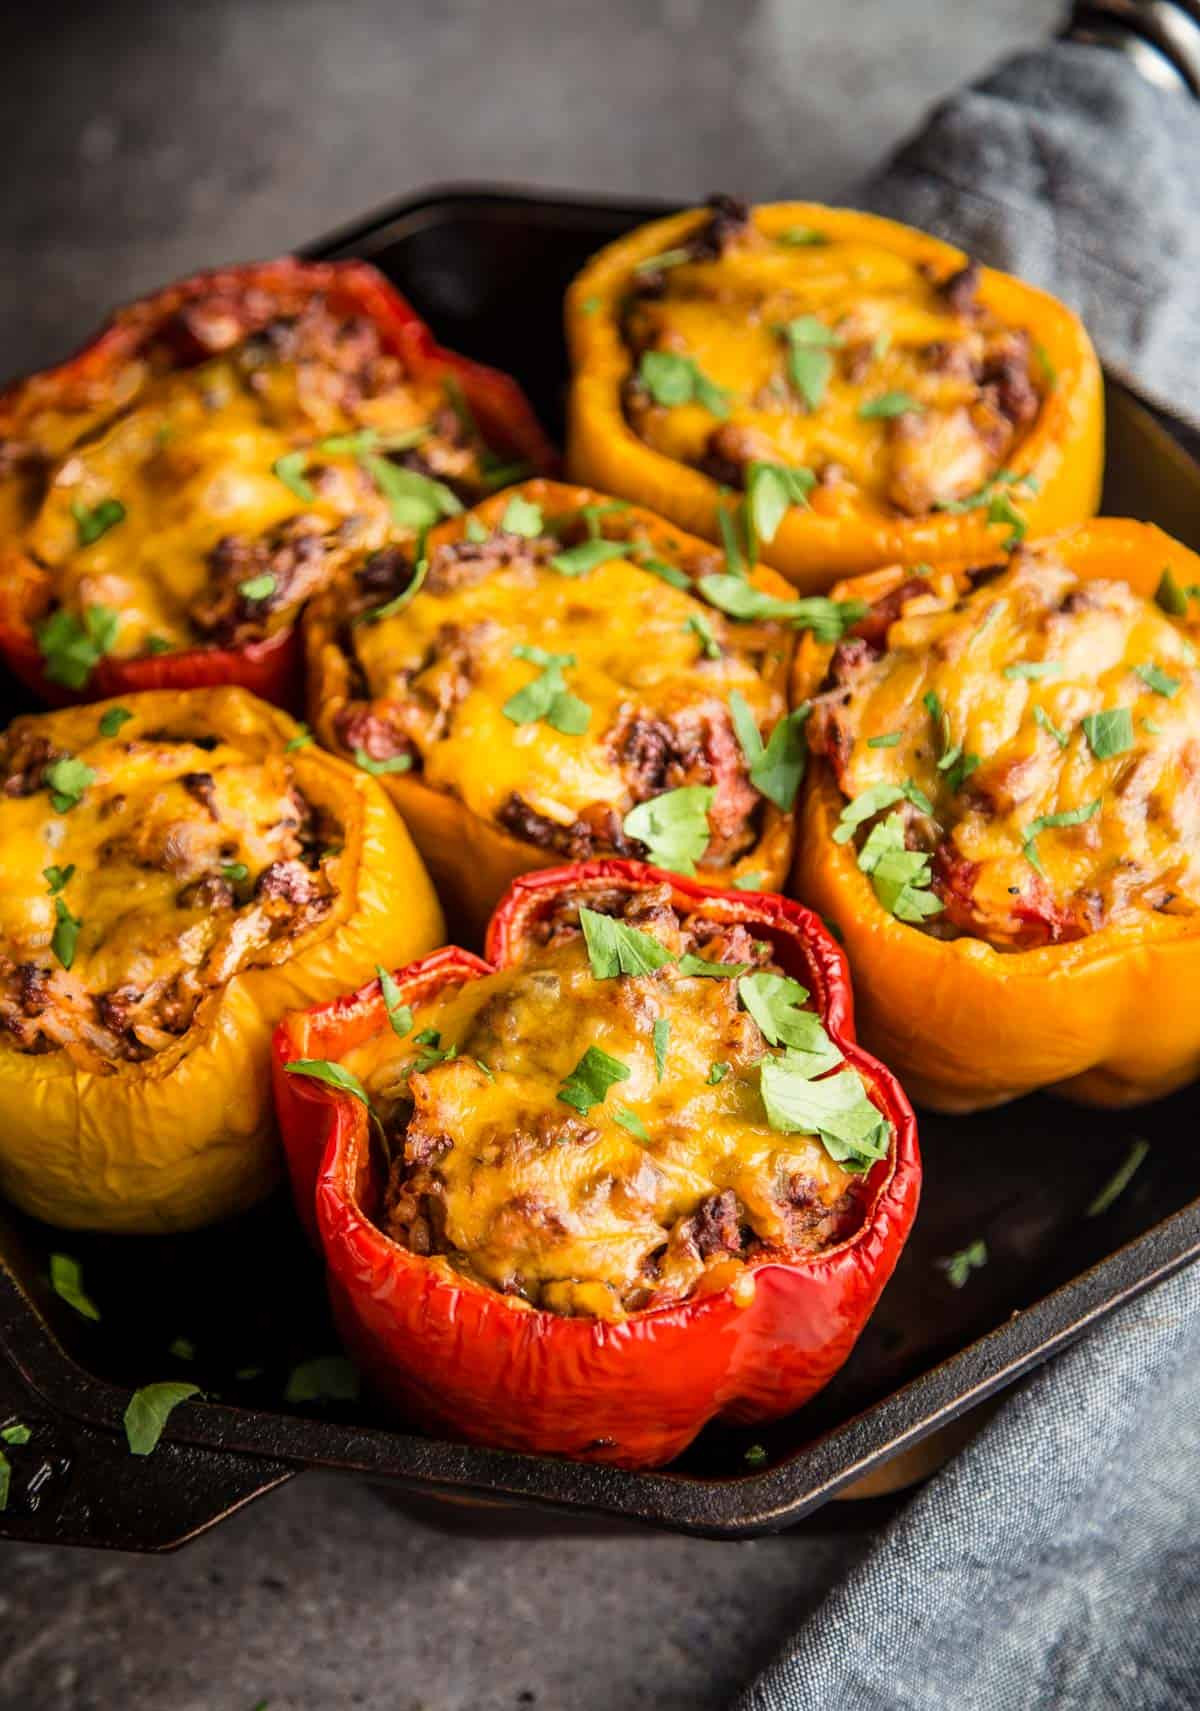 Stuffed Peppers with Ground Beef Elegant Stuffed Peppers with Ground Beef On the Grill Vindulge